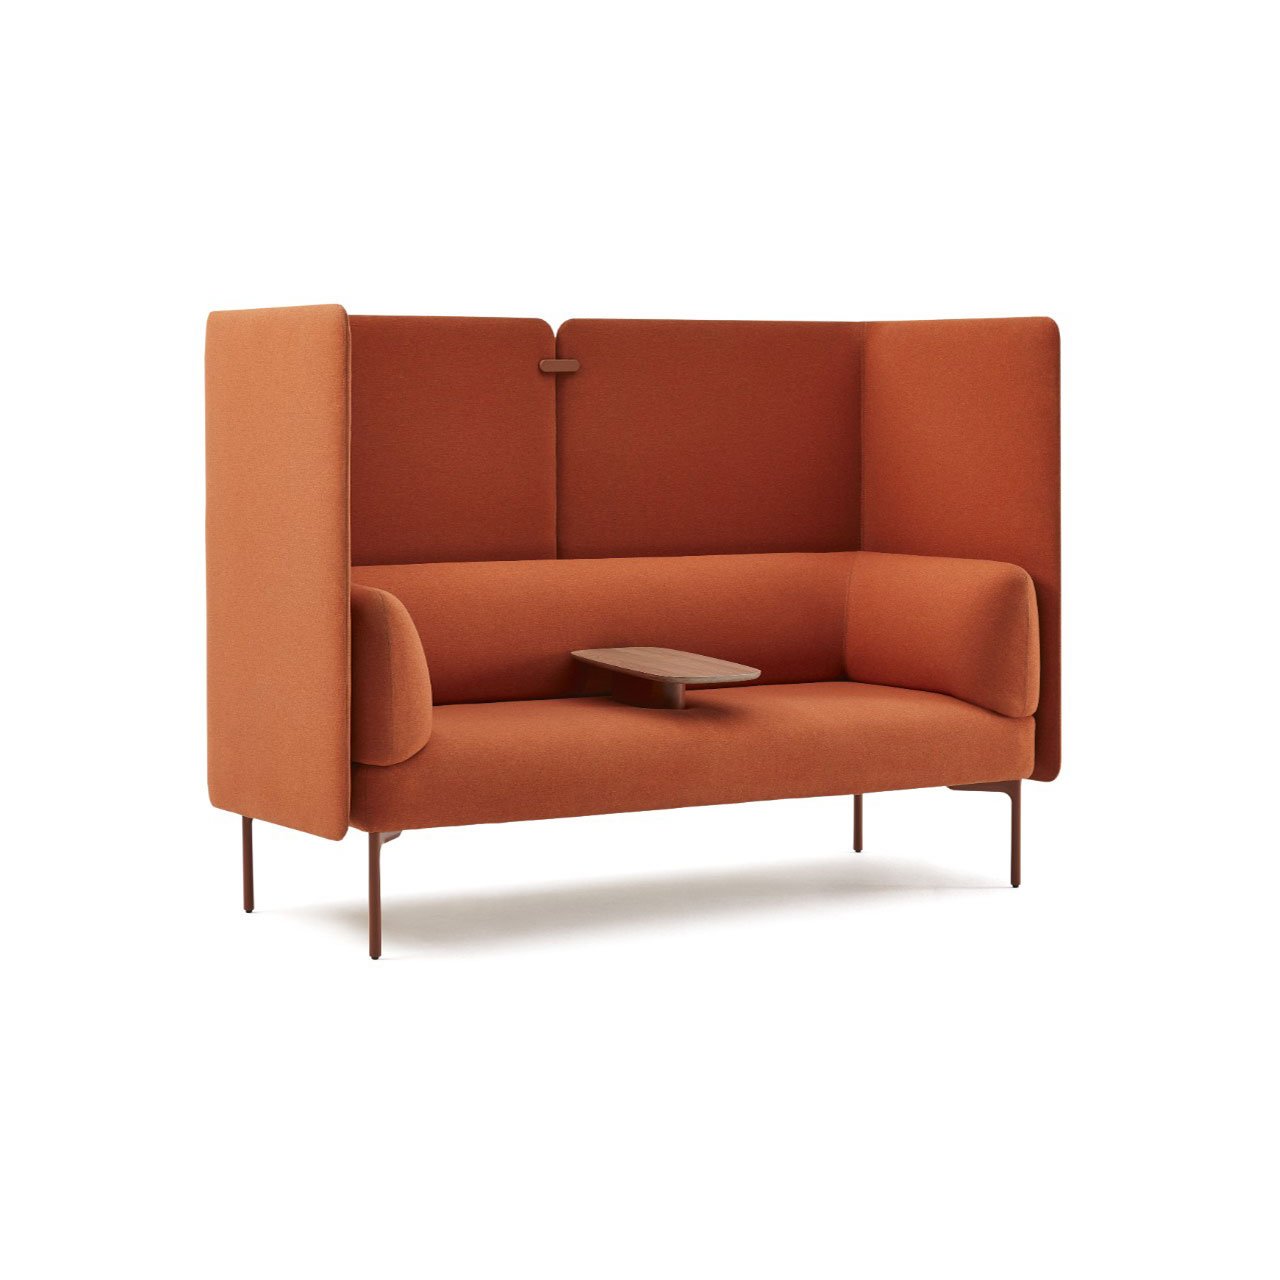 Cabana Lounge sofa with high acoustic screen back